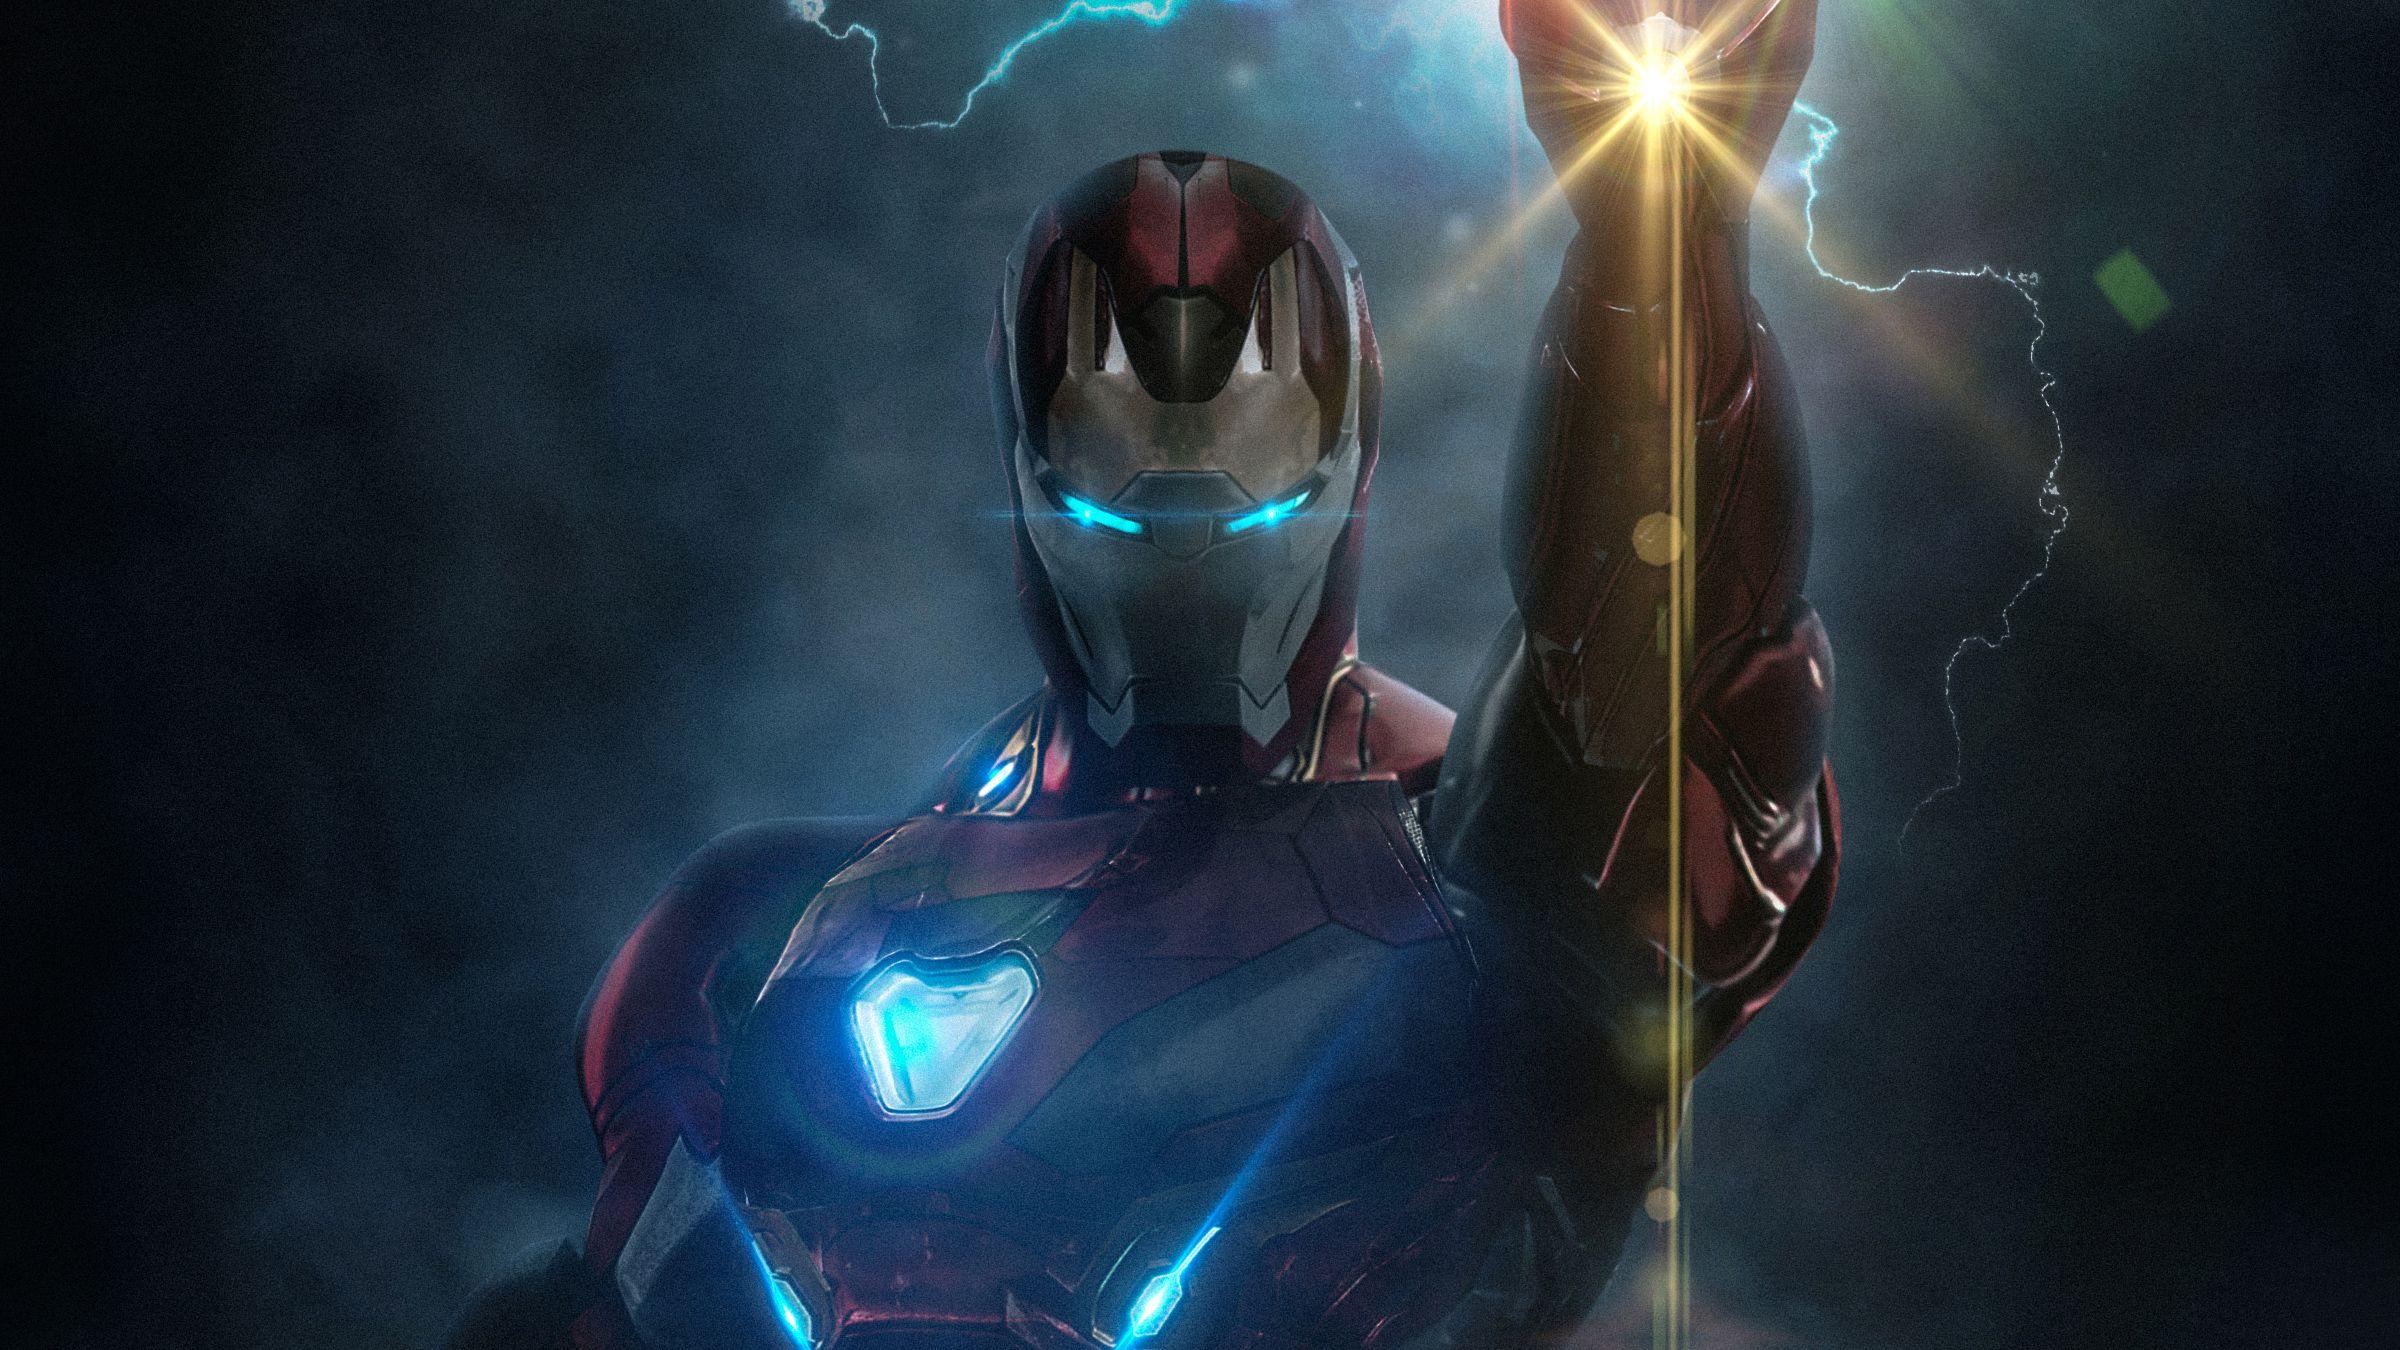 Avengers Endgame HD wallpaper for Android and iPhone